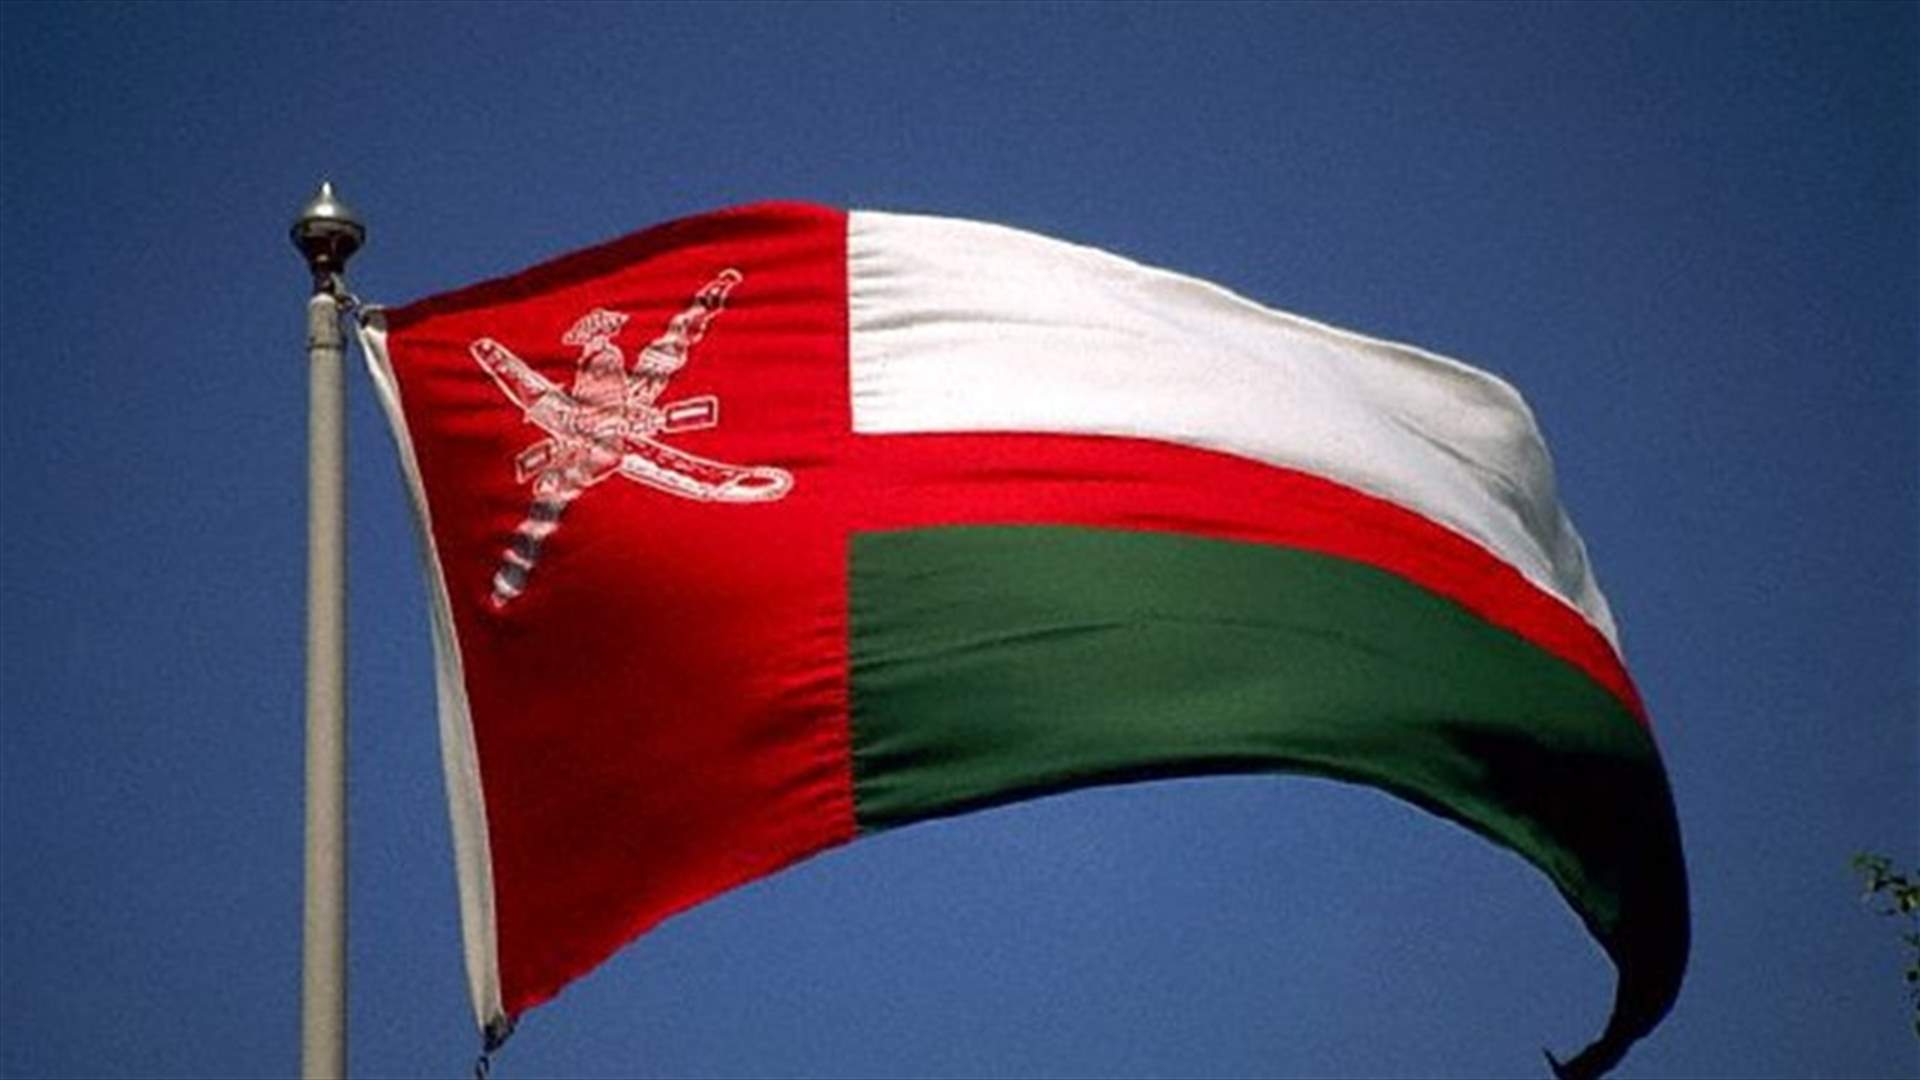 Oman to end lockdown of Muscat governorate on May 29